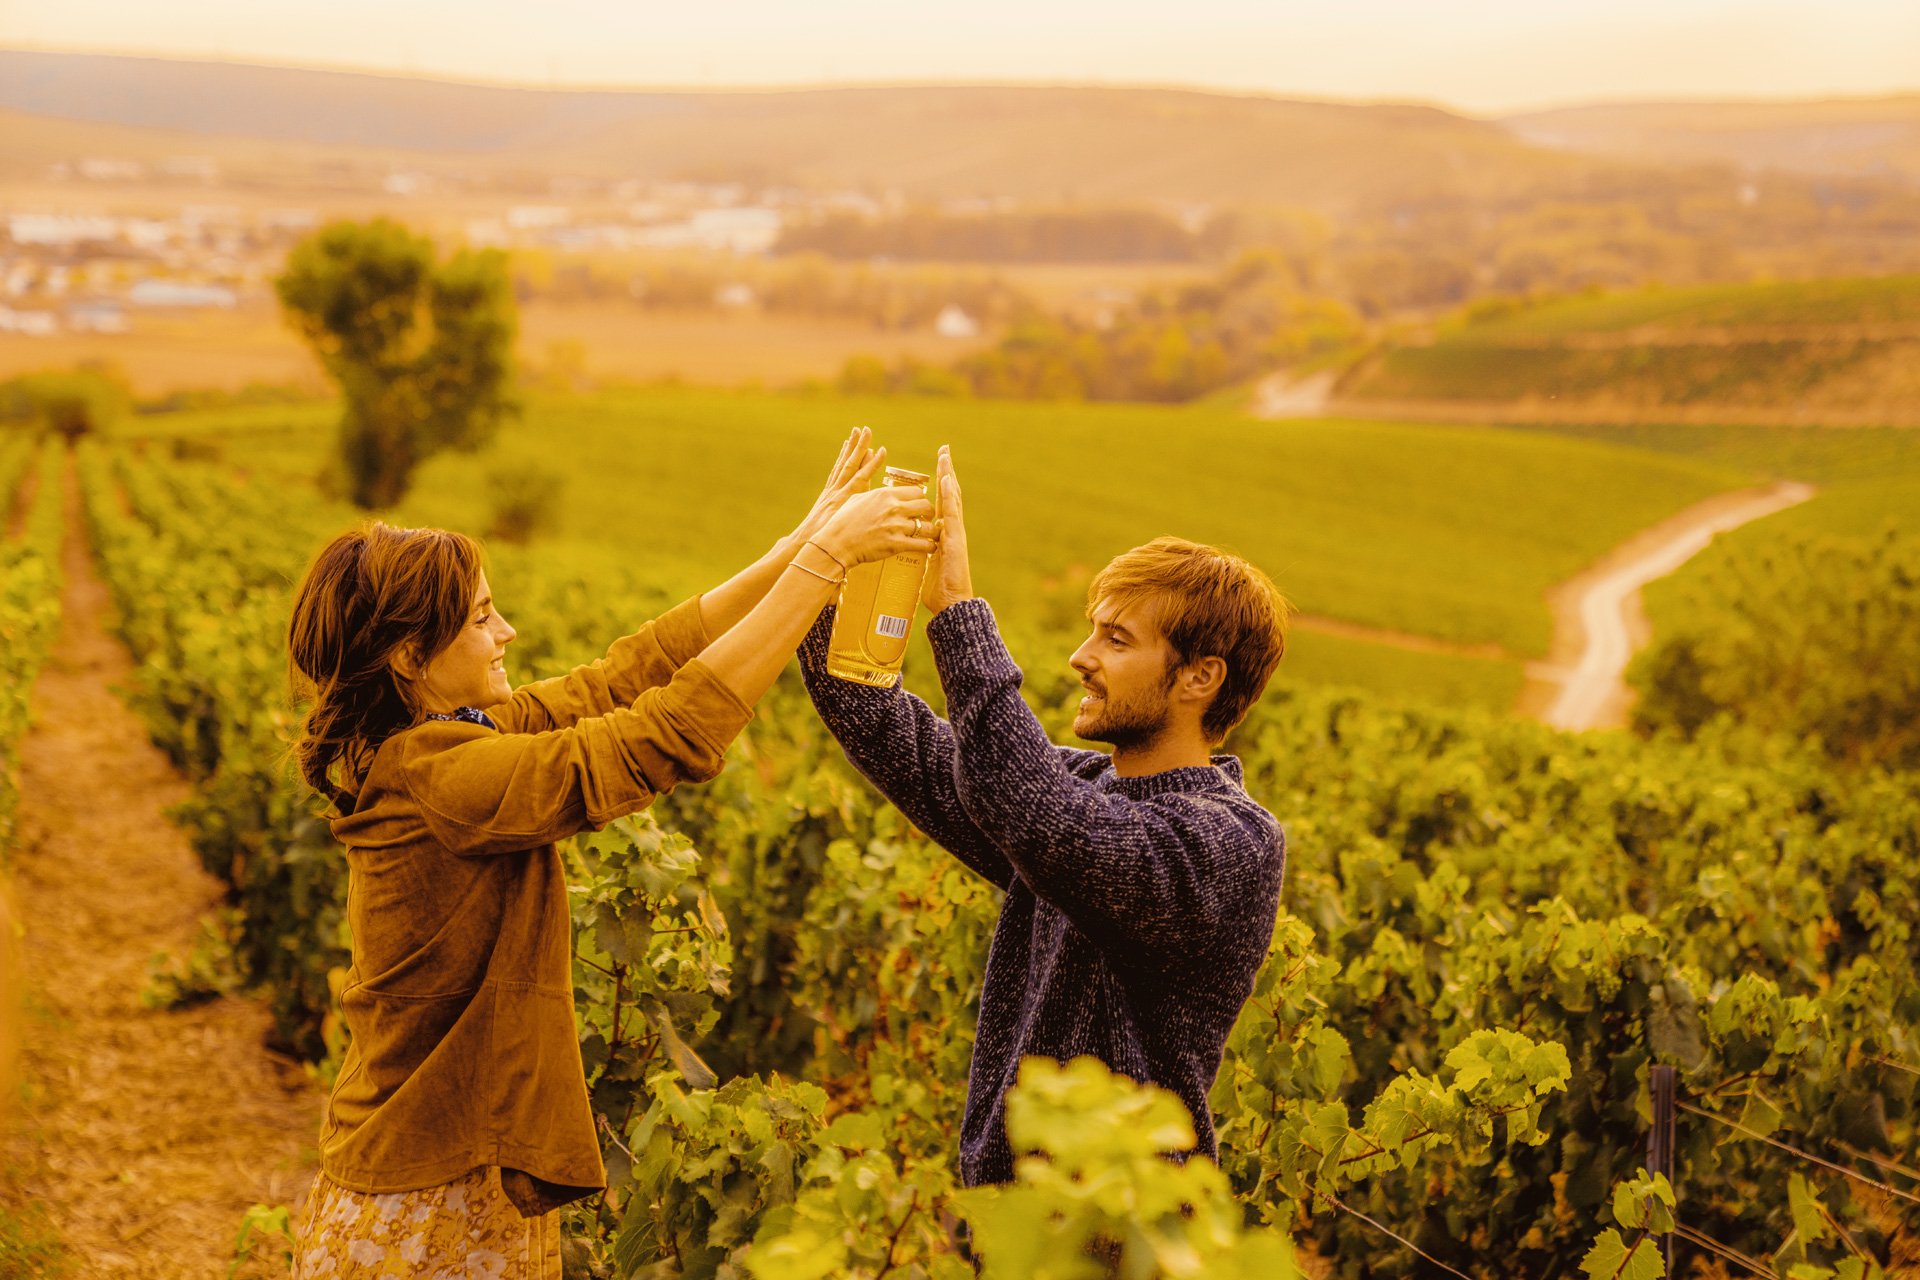 Emma and Alex Watson in their family vineyard